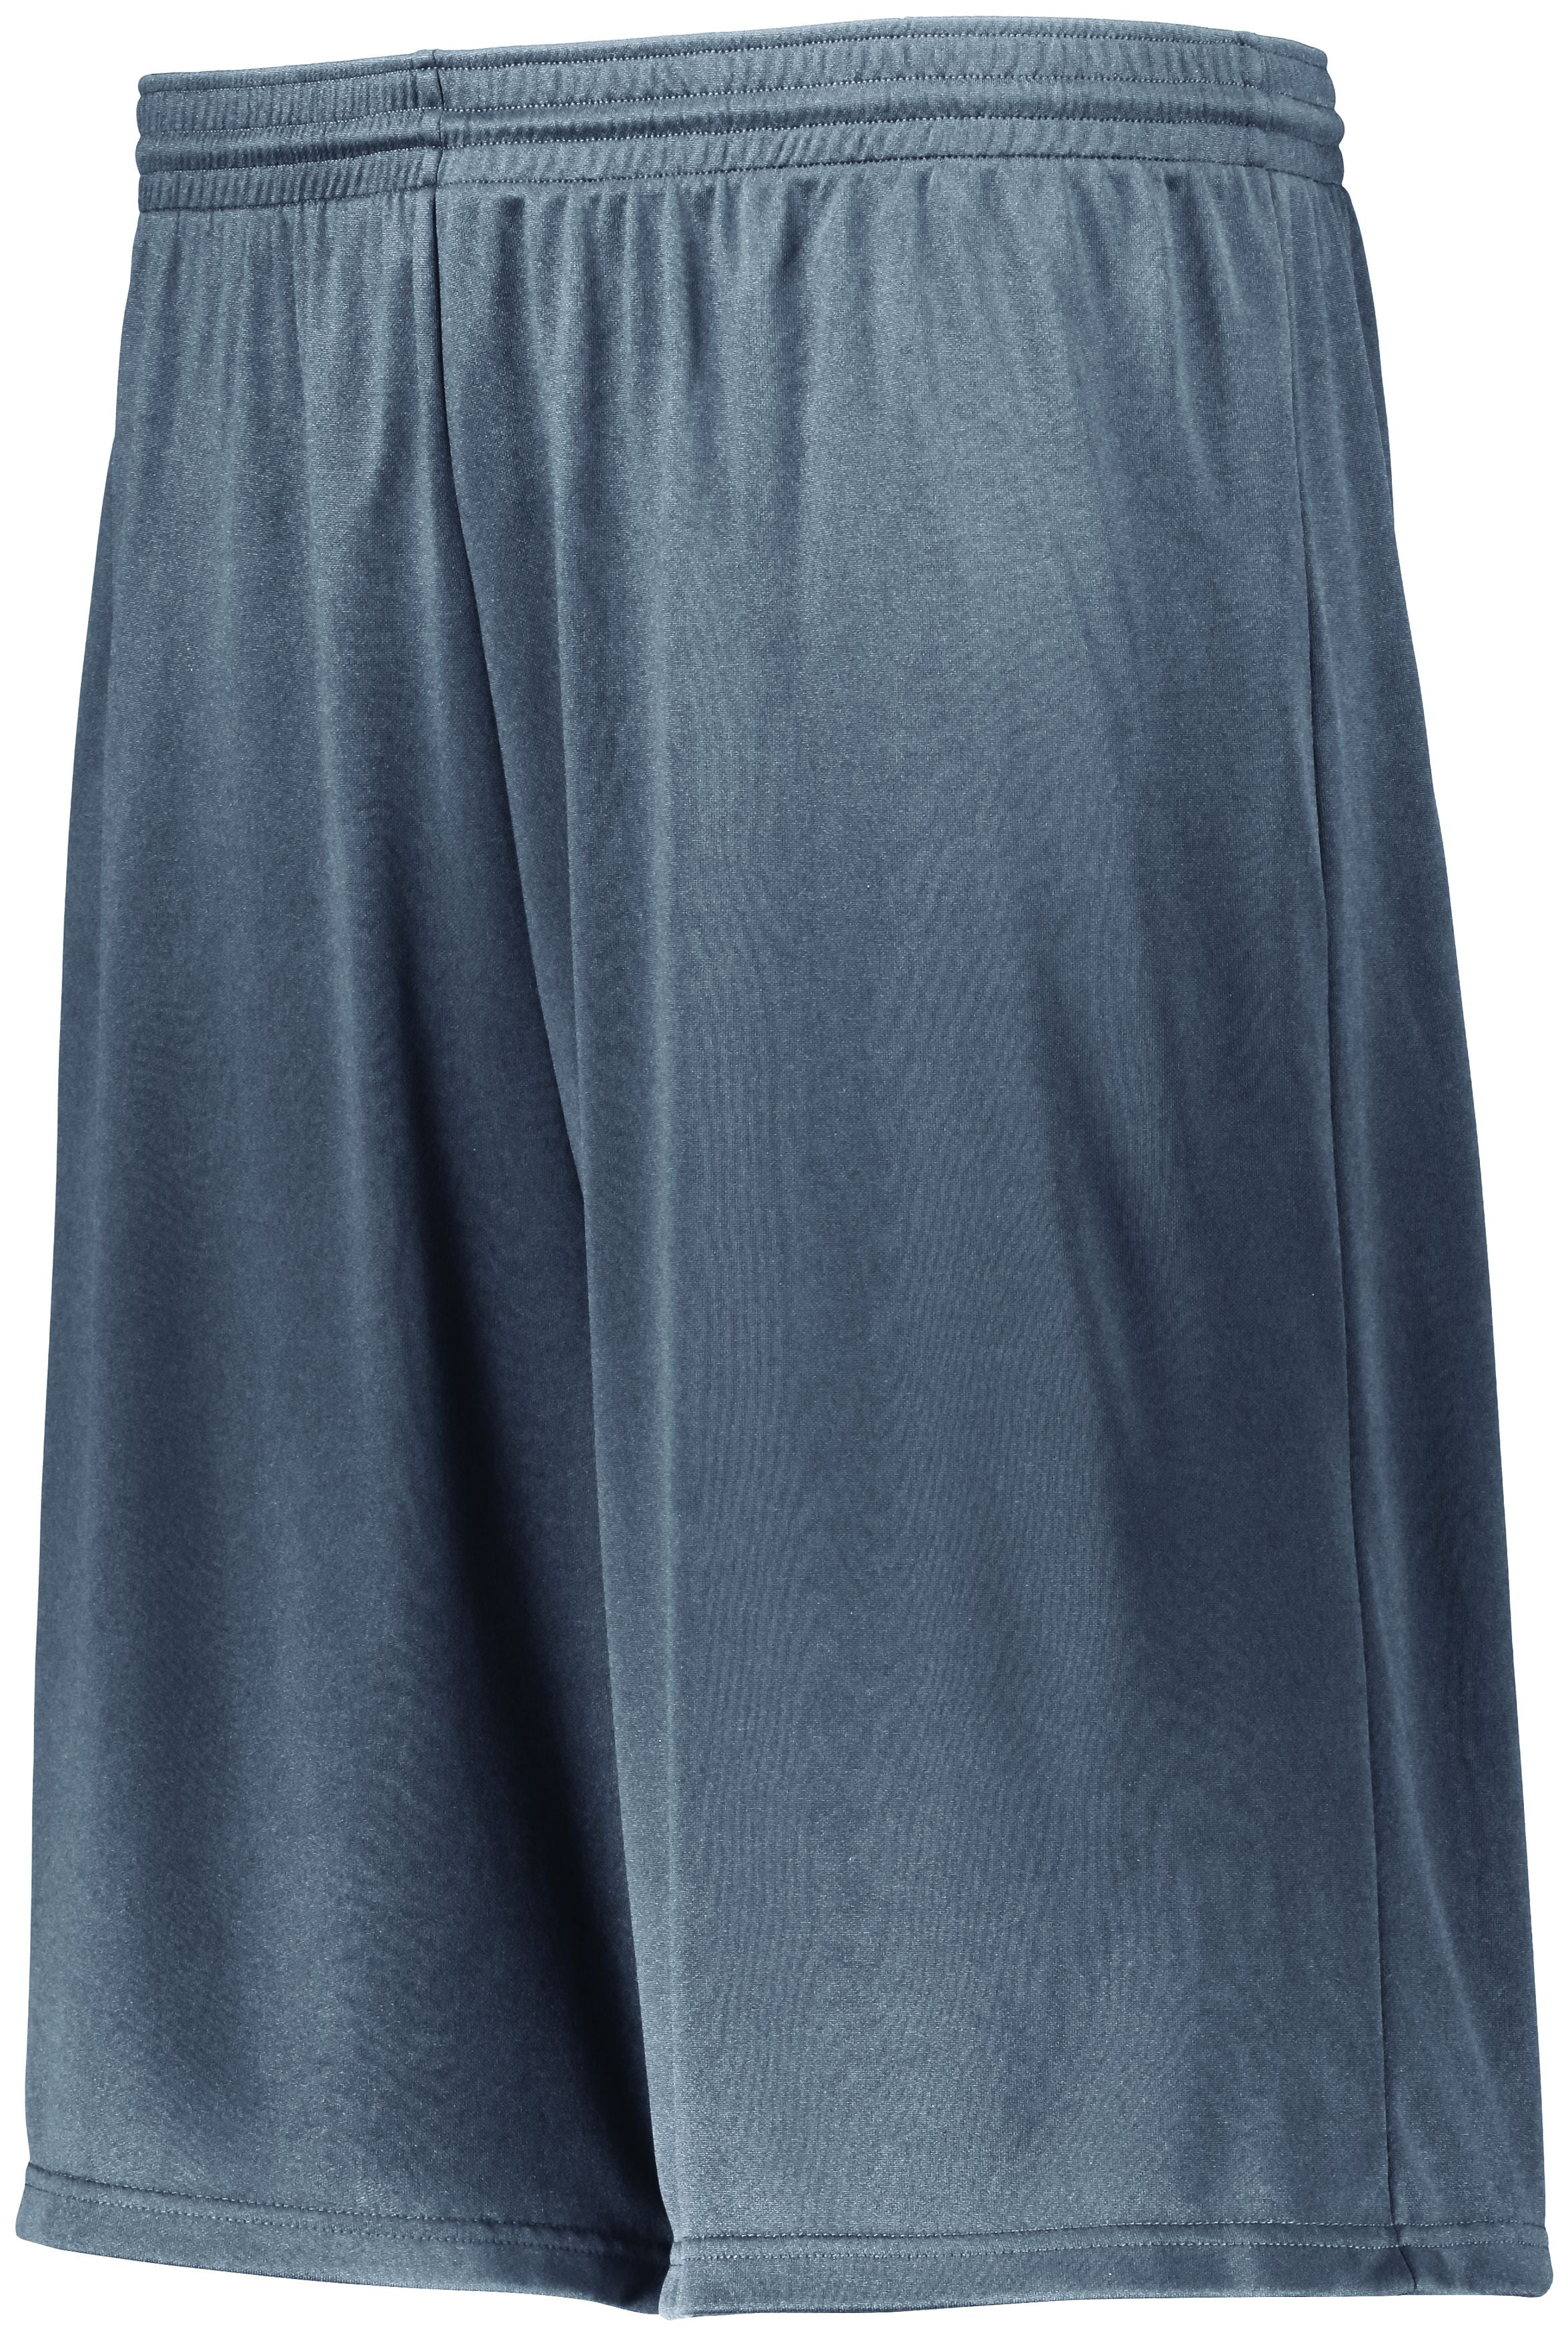 Augusta Sportswear Longer Length Attain Wicking Shorts in Graphite  -Part of the Adult, Adult-Shorts, Augusta-Products product lines at KanaleyCreations.com